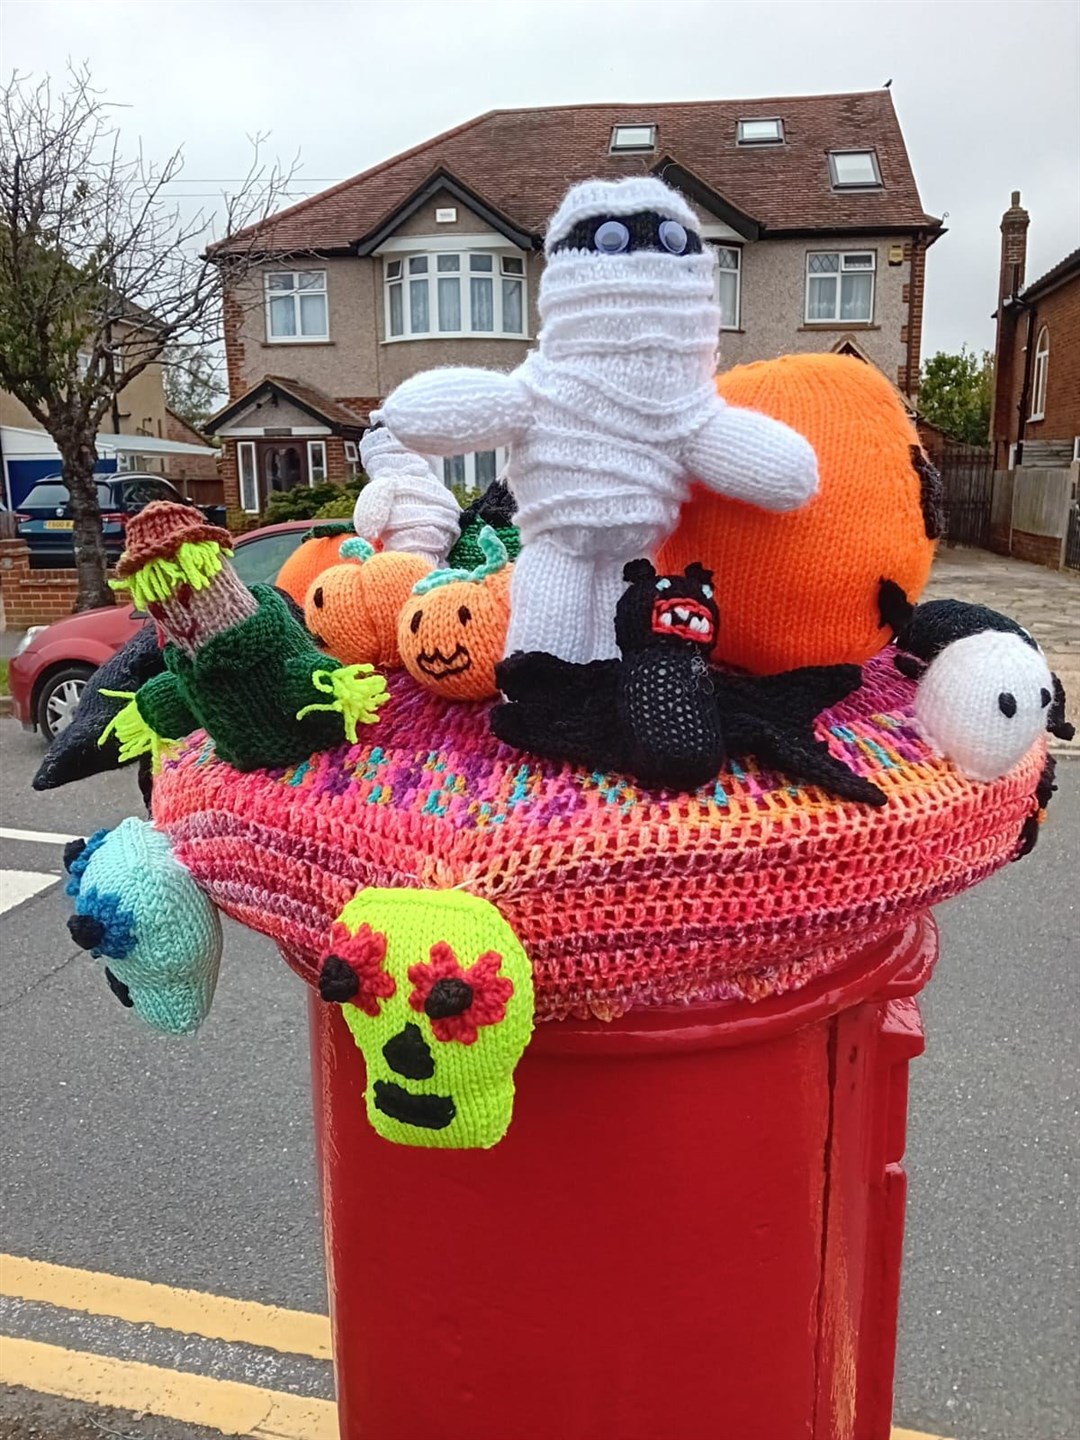 The items on Brenda Fowler’s topper include a mummy and pumpkin (Brenda Fowler/PA)